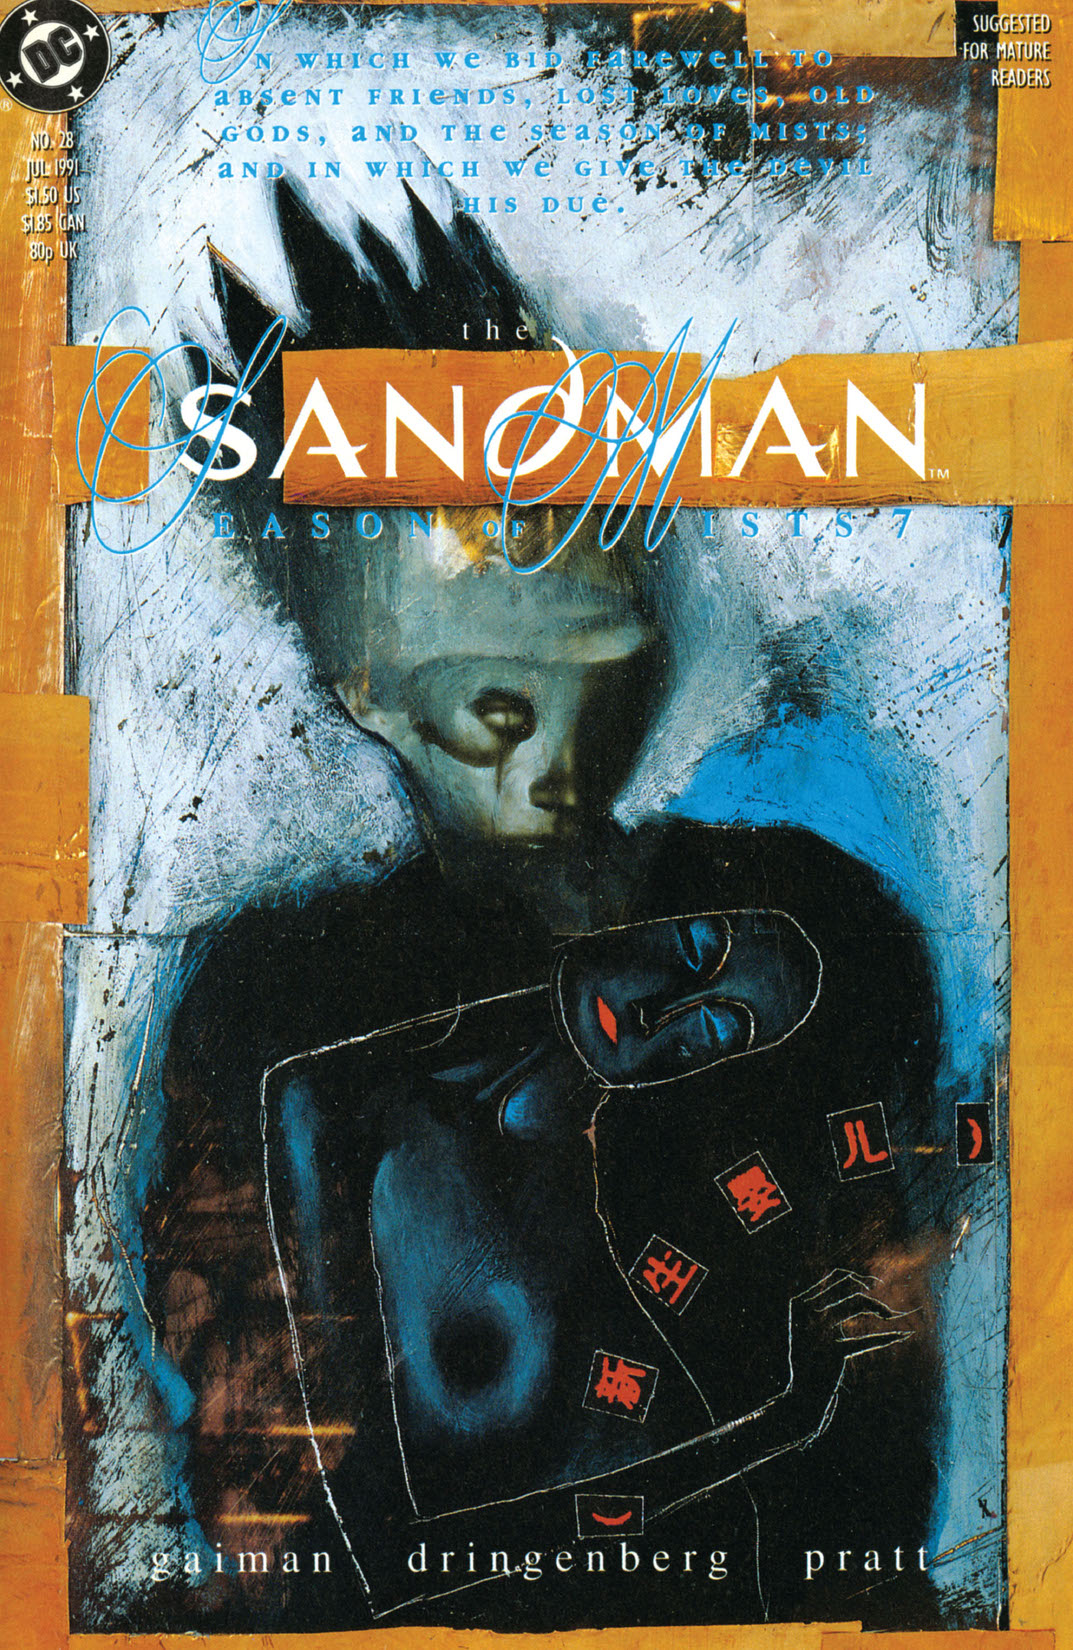 The Sandman #28 preview images